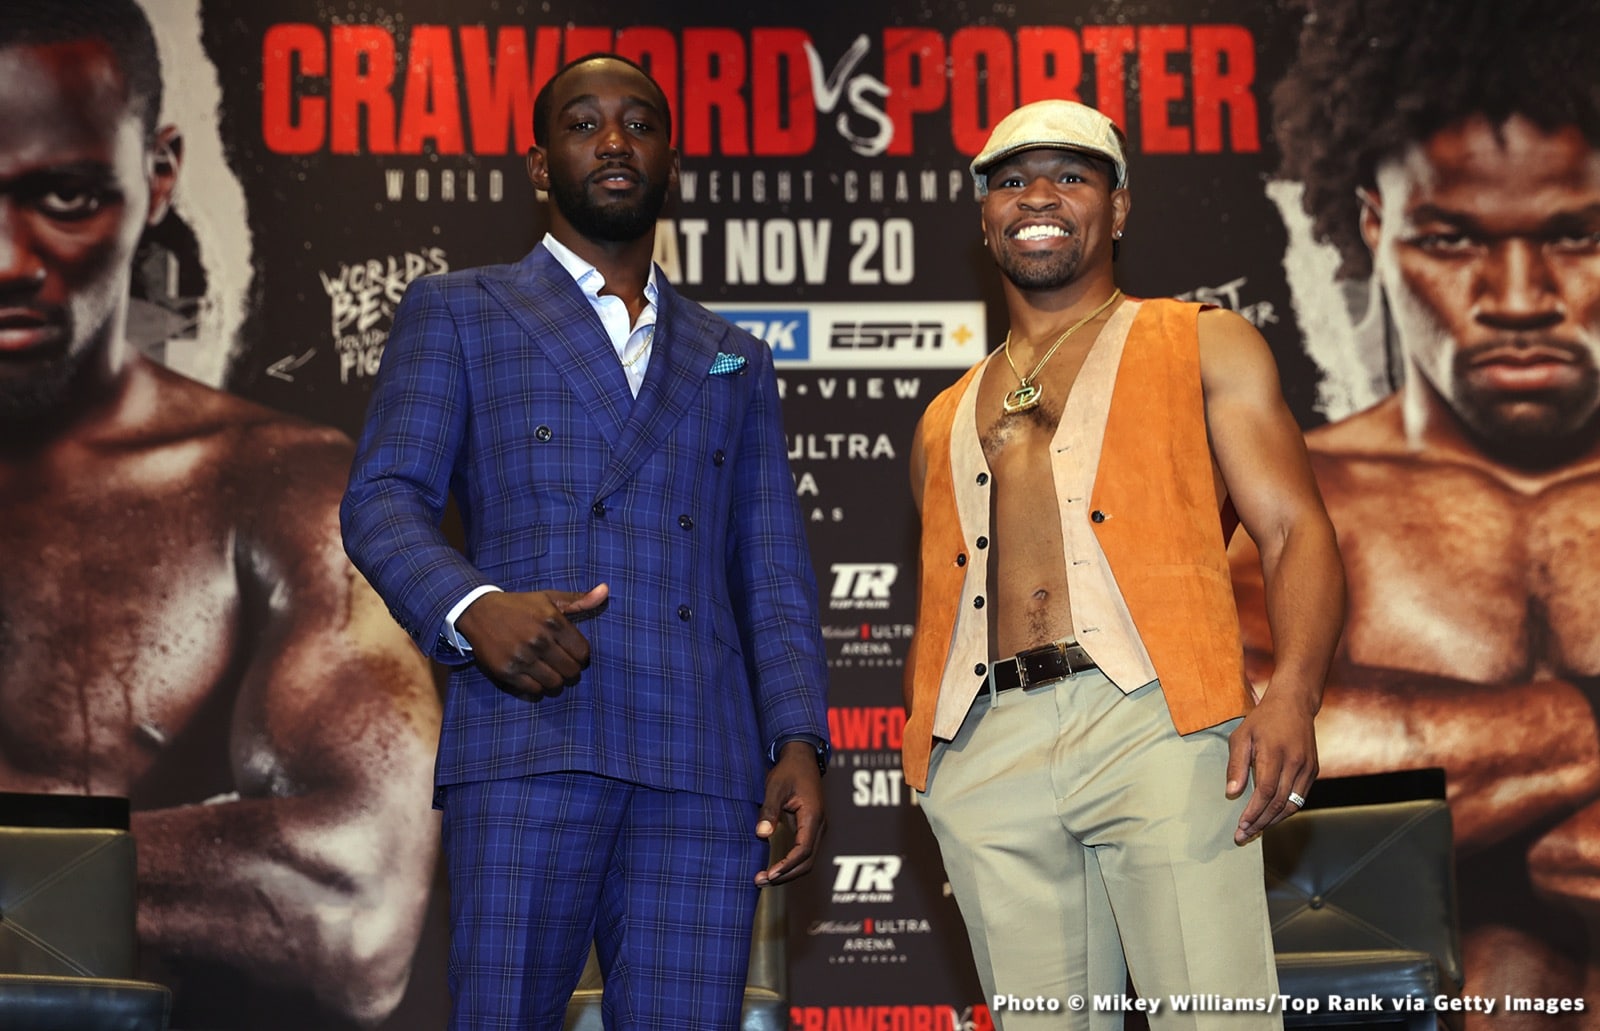 Image: Terence Crawford vs. Shawn Porter = 50-50 fight - says Tim Bradley